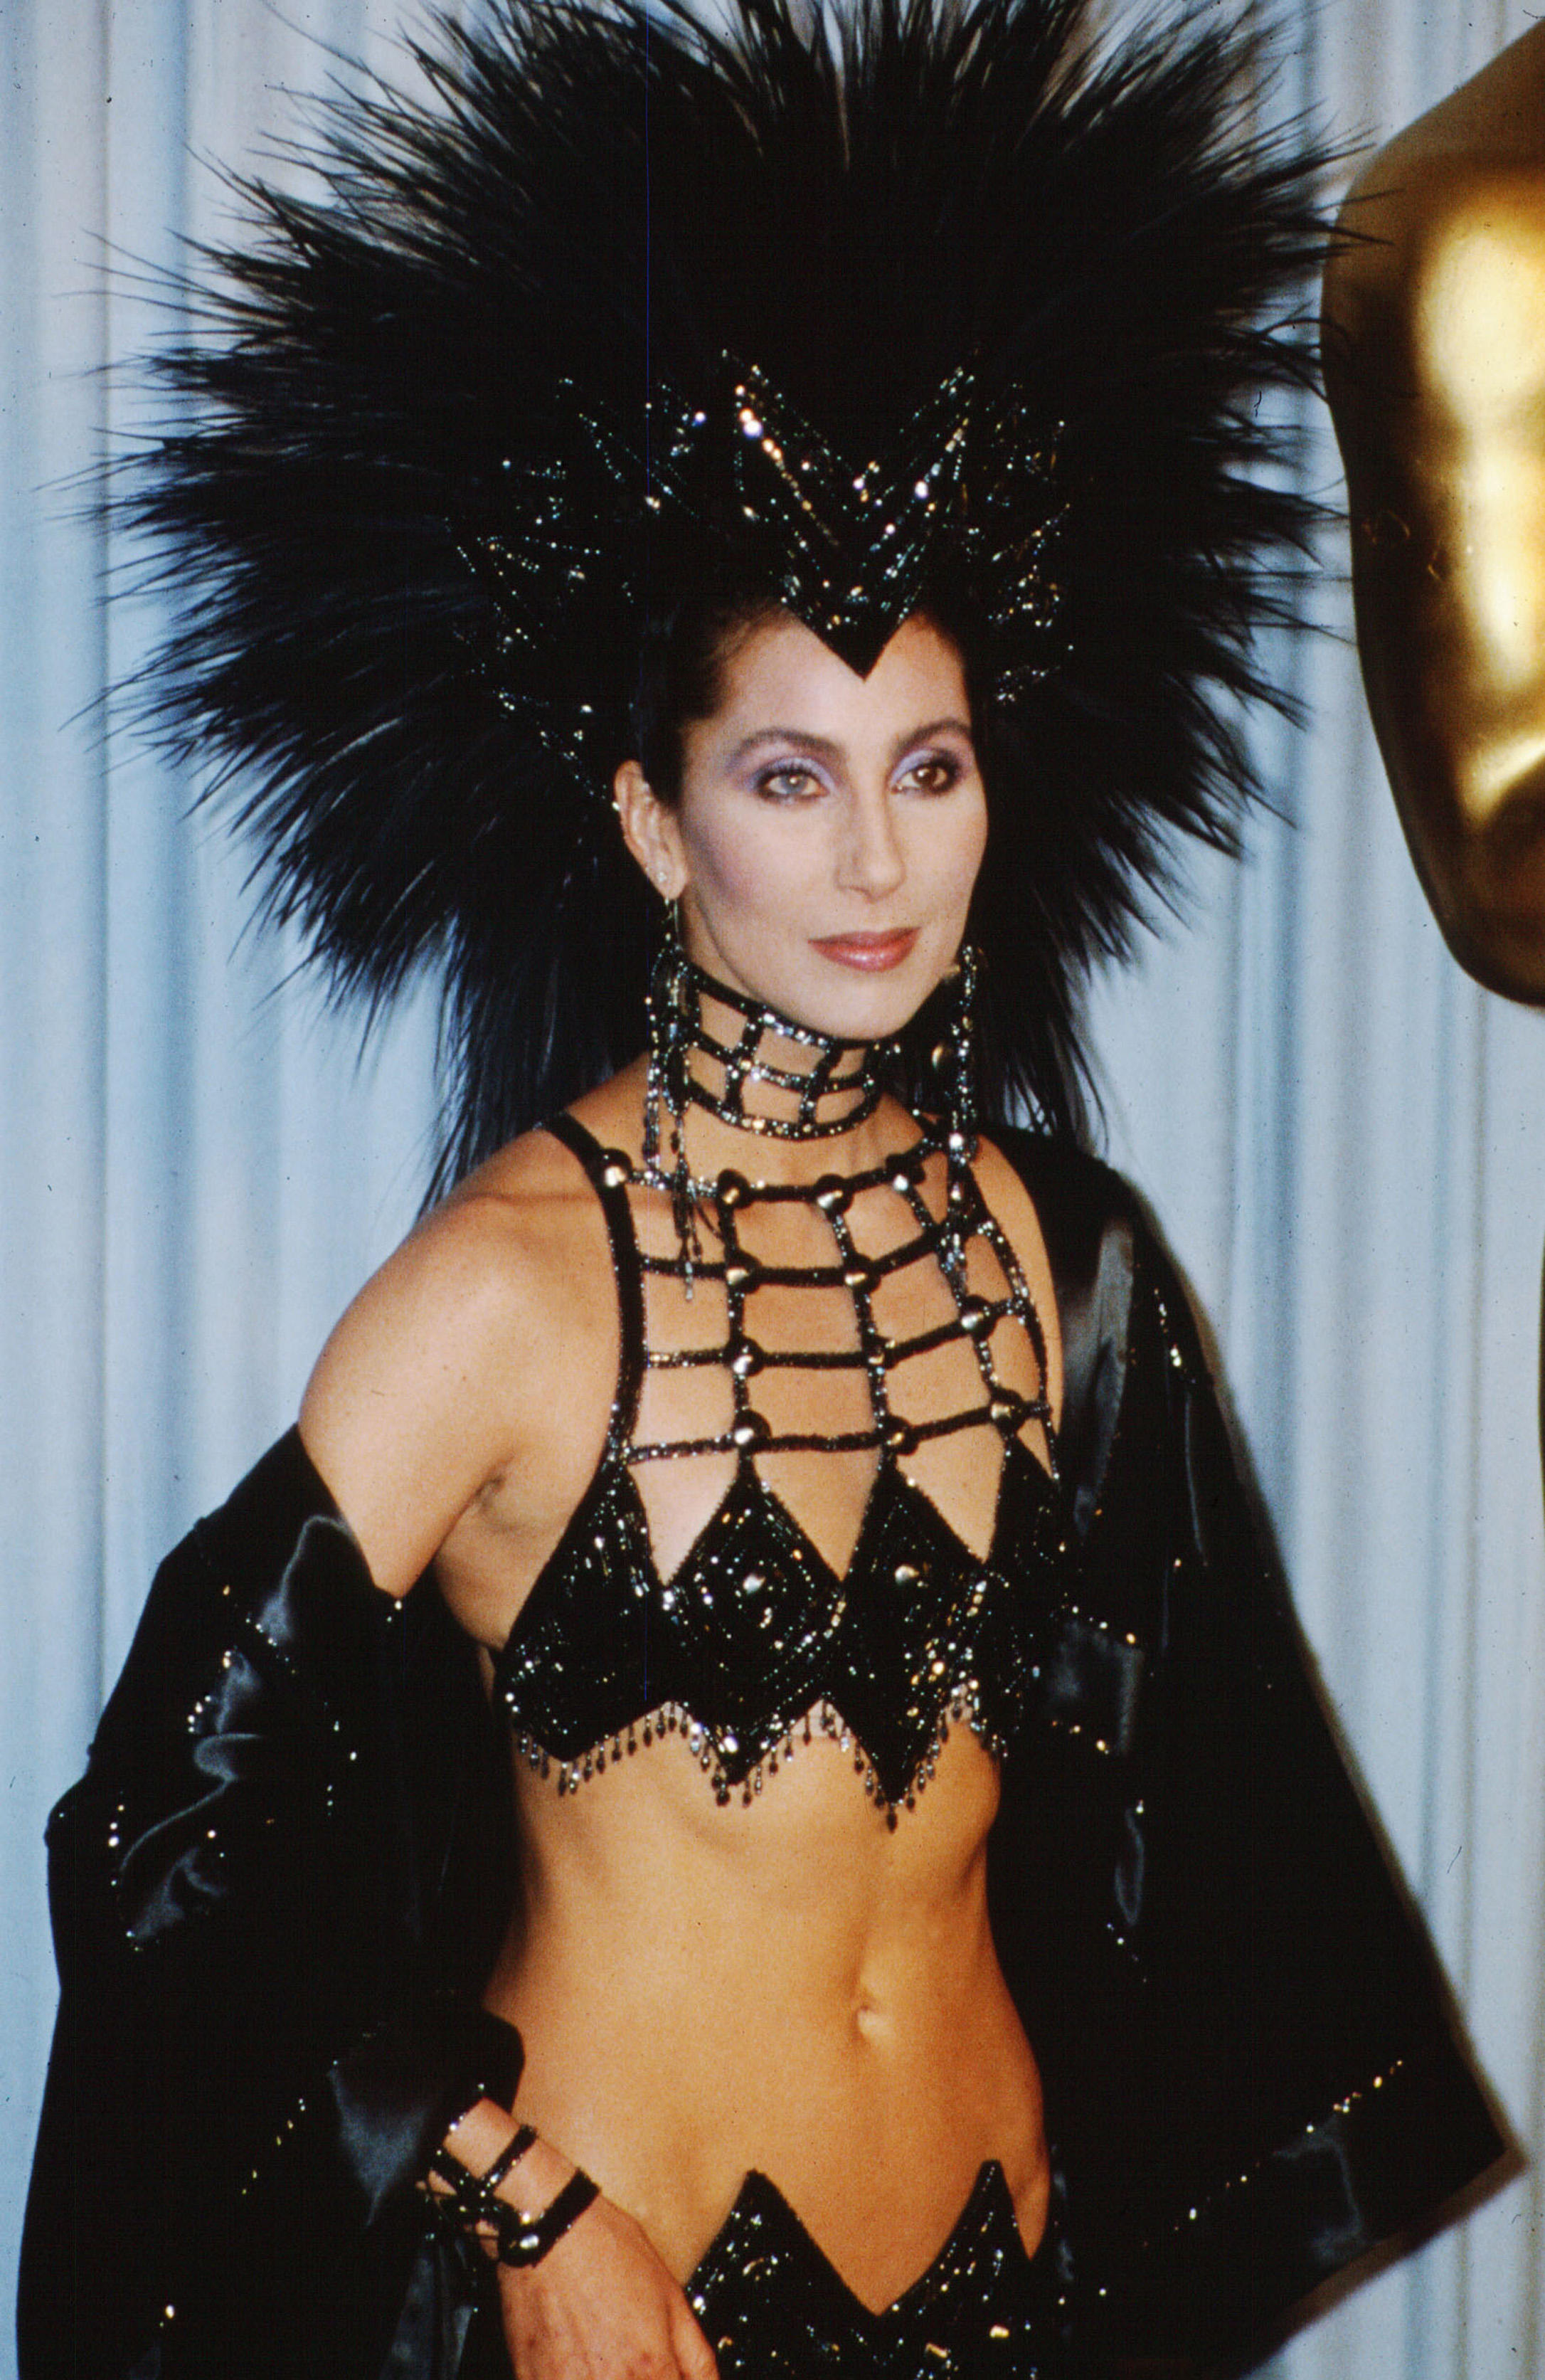 Cher at the Academy Awards in 1986